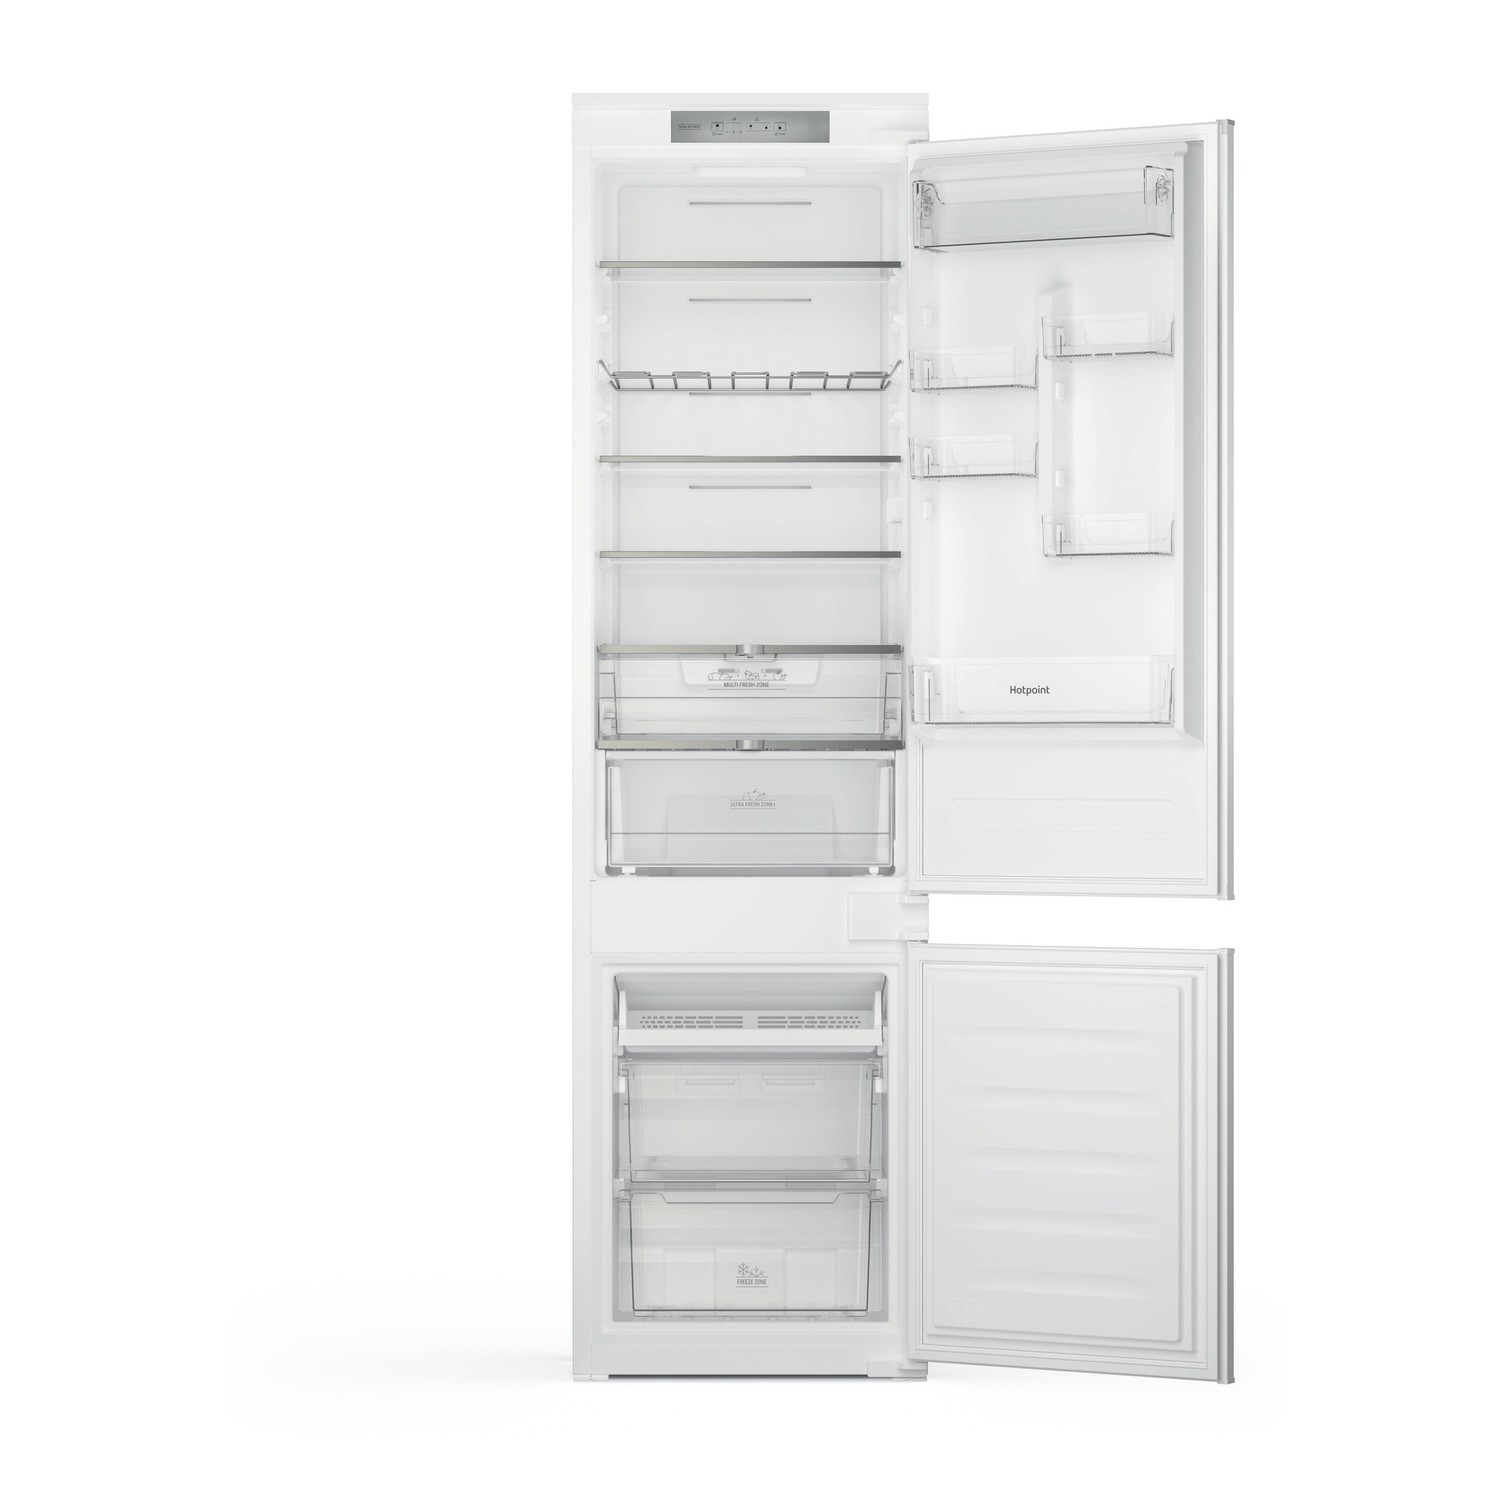 Photos - Other for Computer Hotpoint-Ariston HOTPOINT 280 Litre 70/30 Integrated Fridge Freezer HTC20T322 